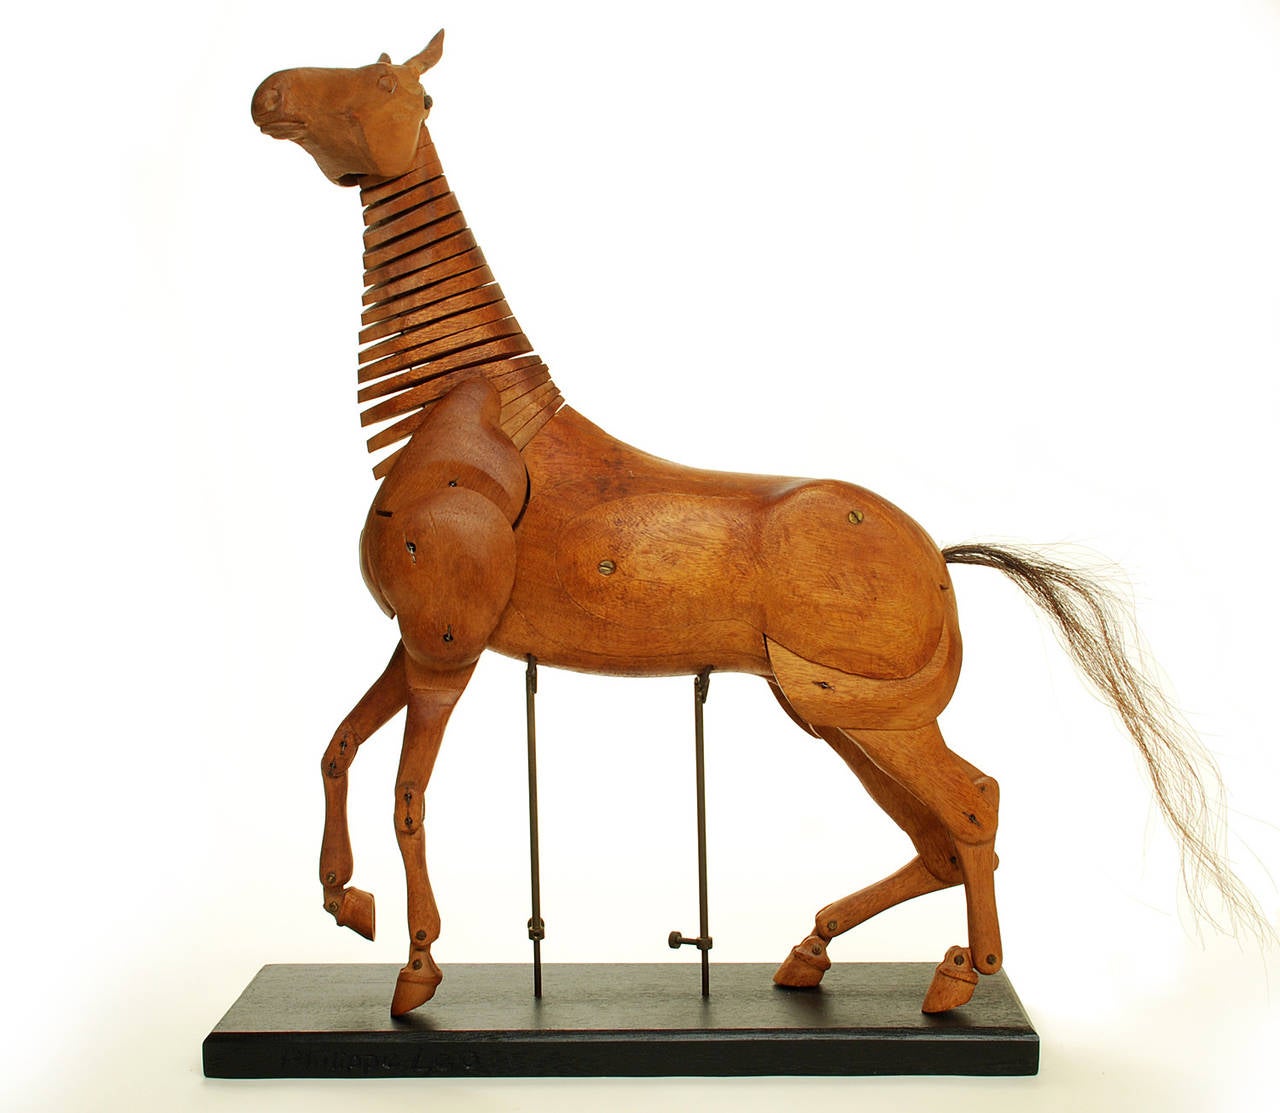 Outstanding vintage hand-carved mahogany artist's model of a horse -- articulated at almost every level, including the hand-carved wooden ears. Artist signed along the side of the base: Philippe Leo.

Dimensions: Horse measures 29 inches long in